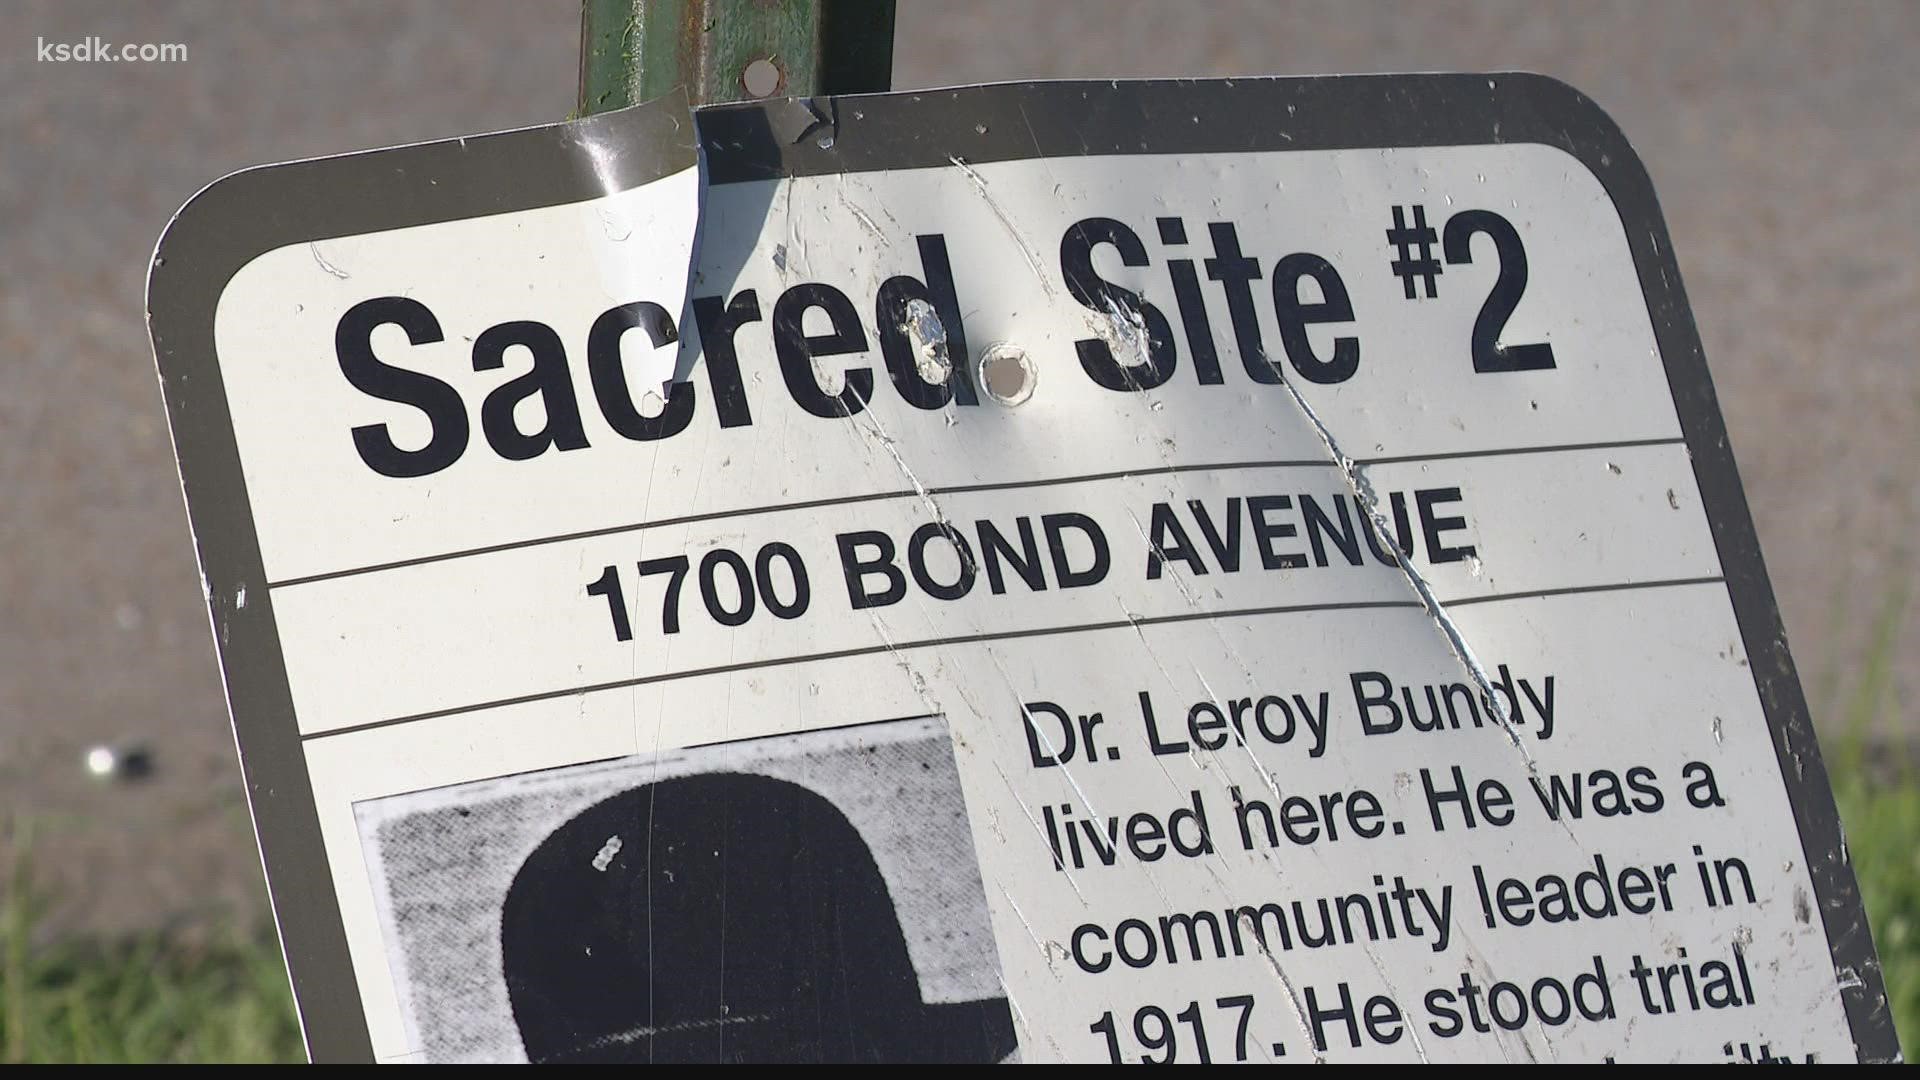 A driver ran over the sign of the sacred site where Dr. Leroy Bundy lived. Bundy was accused and convicted of starting the race riot, but was later exonerated.